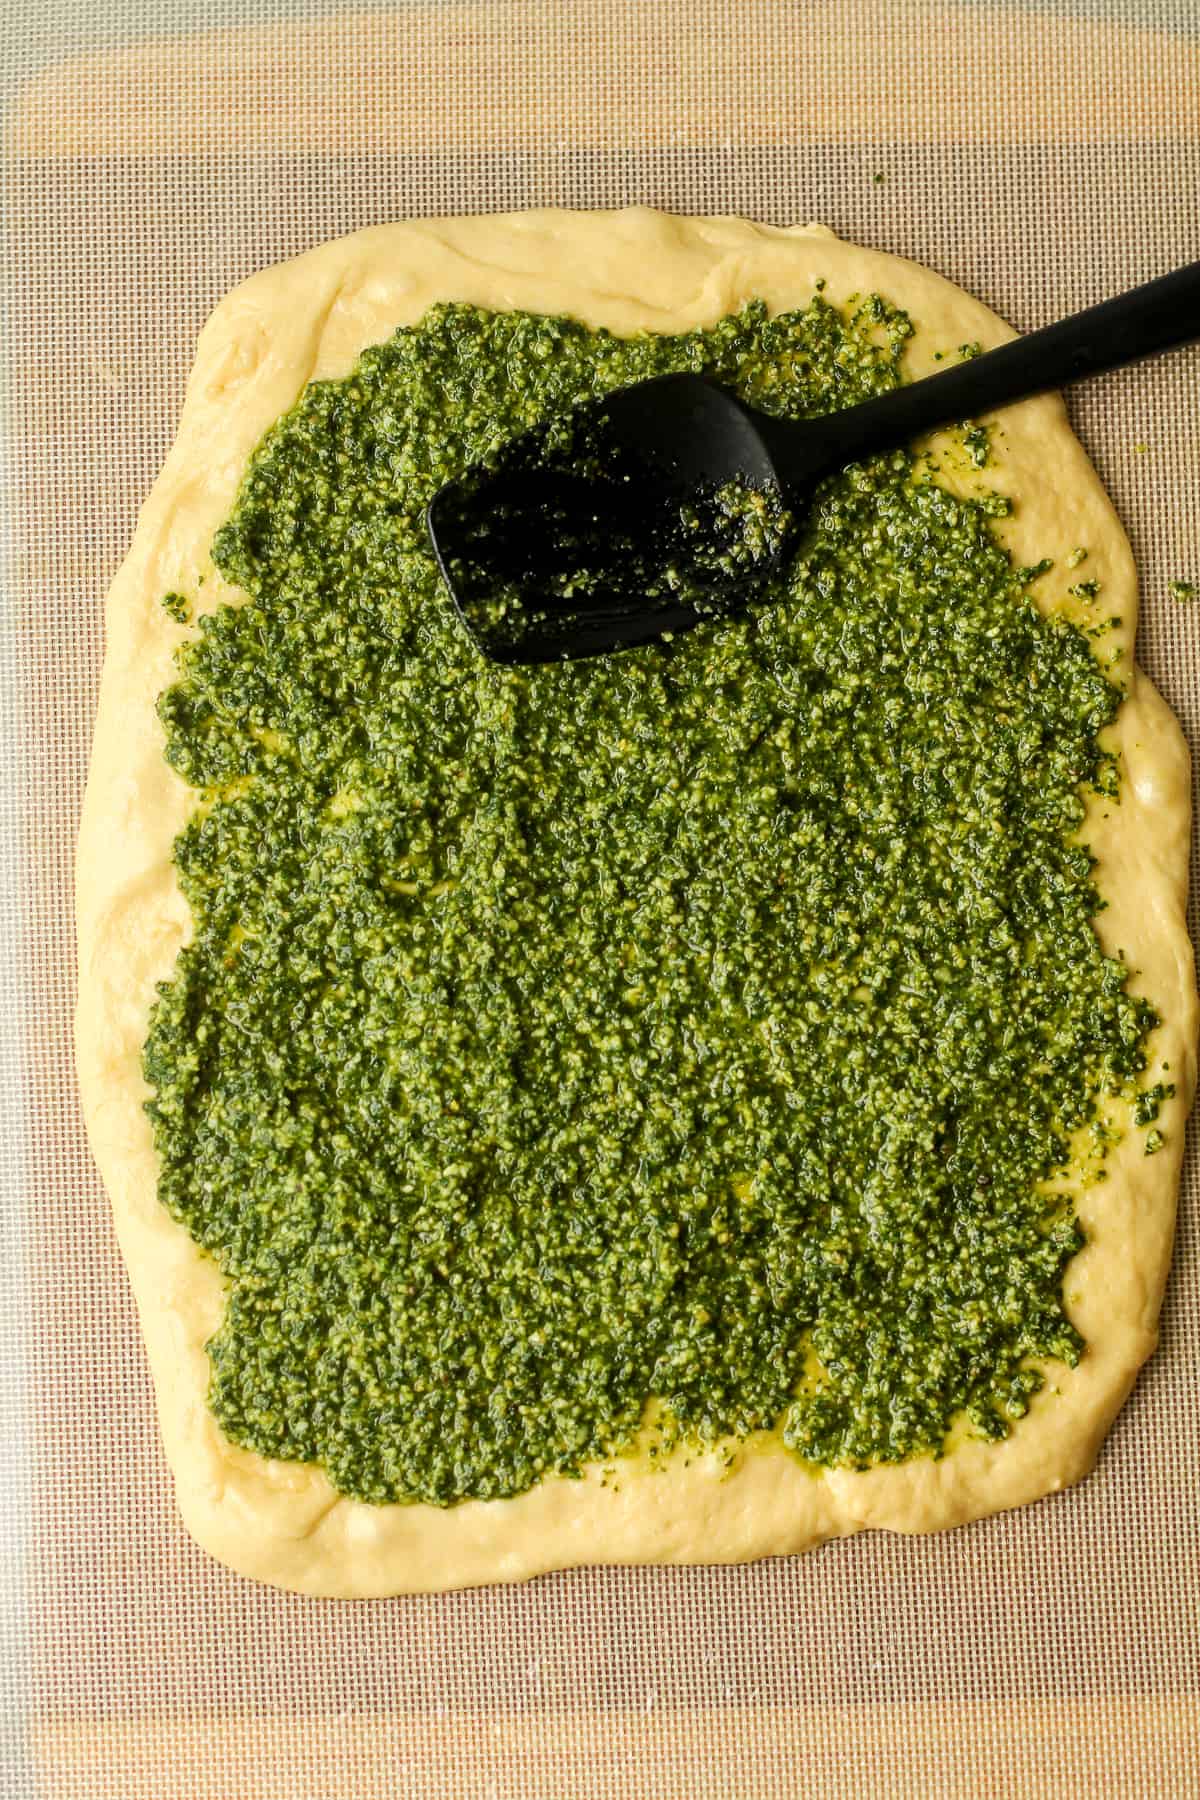 The bread dough with pesto on top.